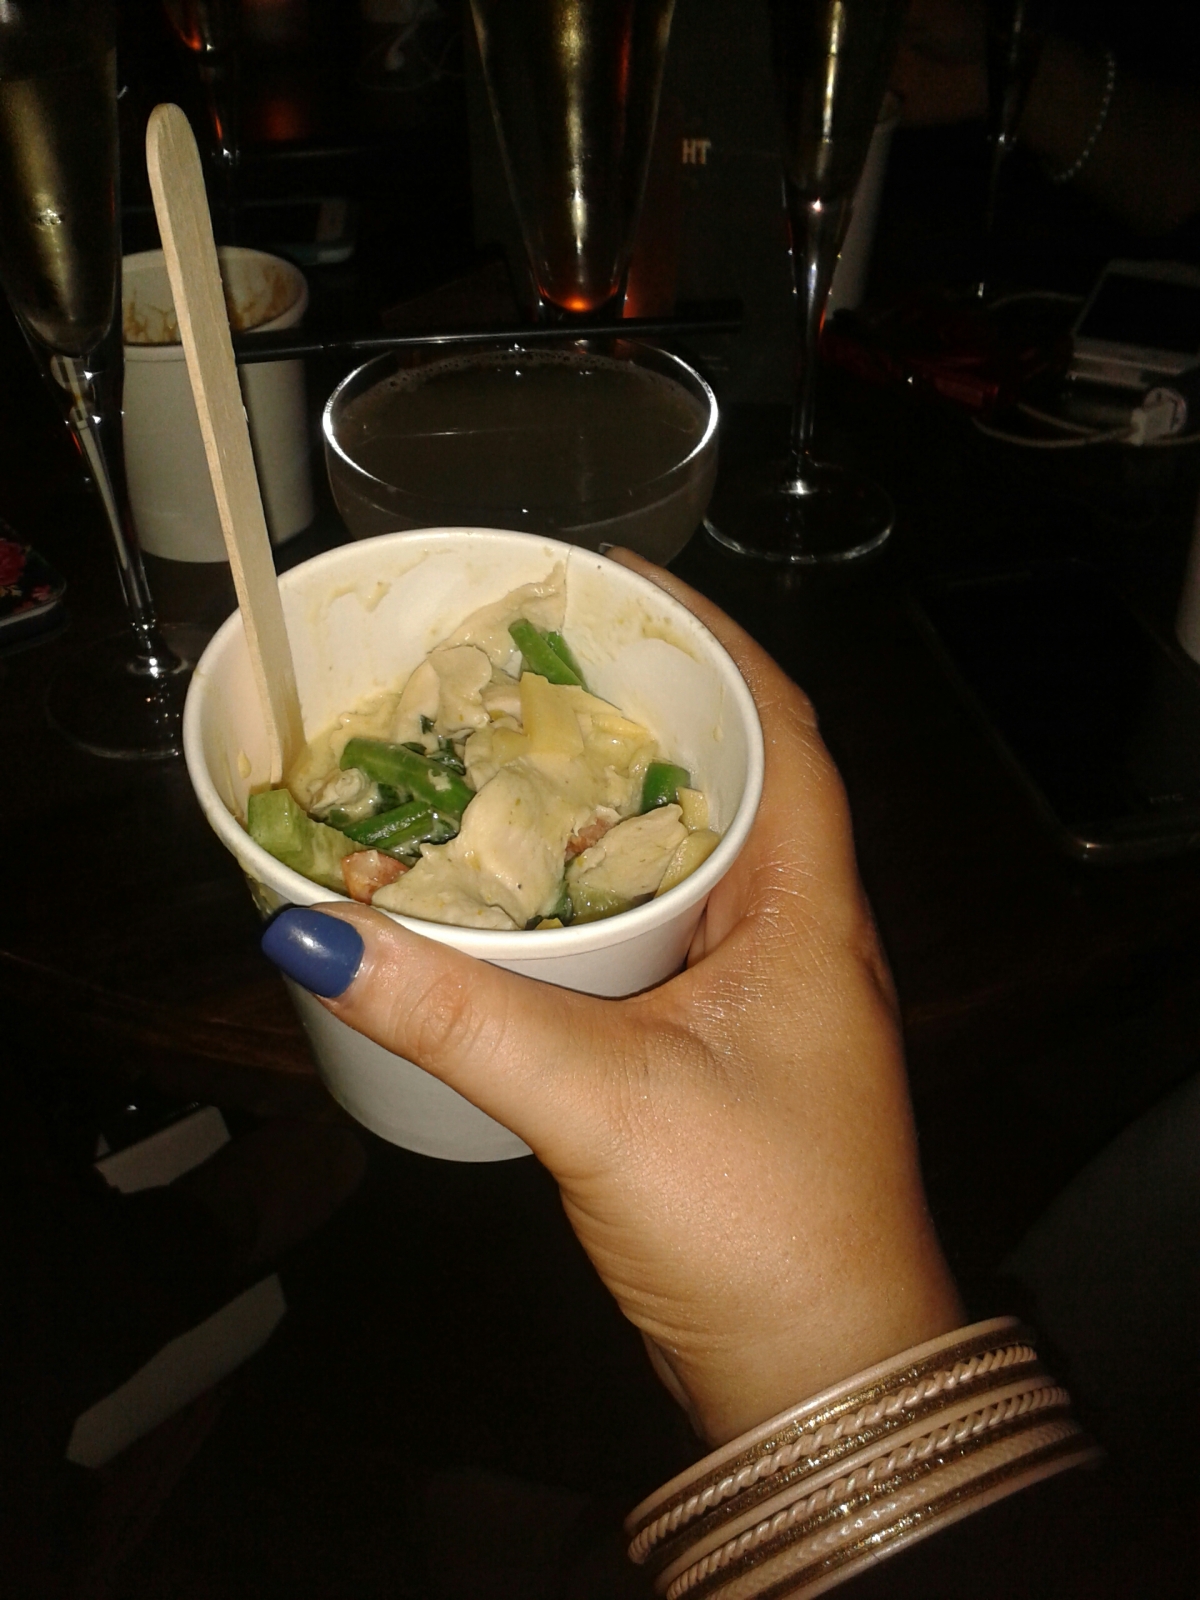 Best-seller Siam Thai's Green Curry at the Siam Thai 21st Birthday Bash! #Siam21 